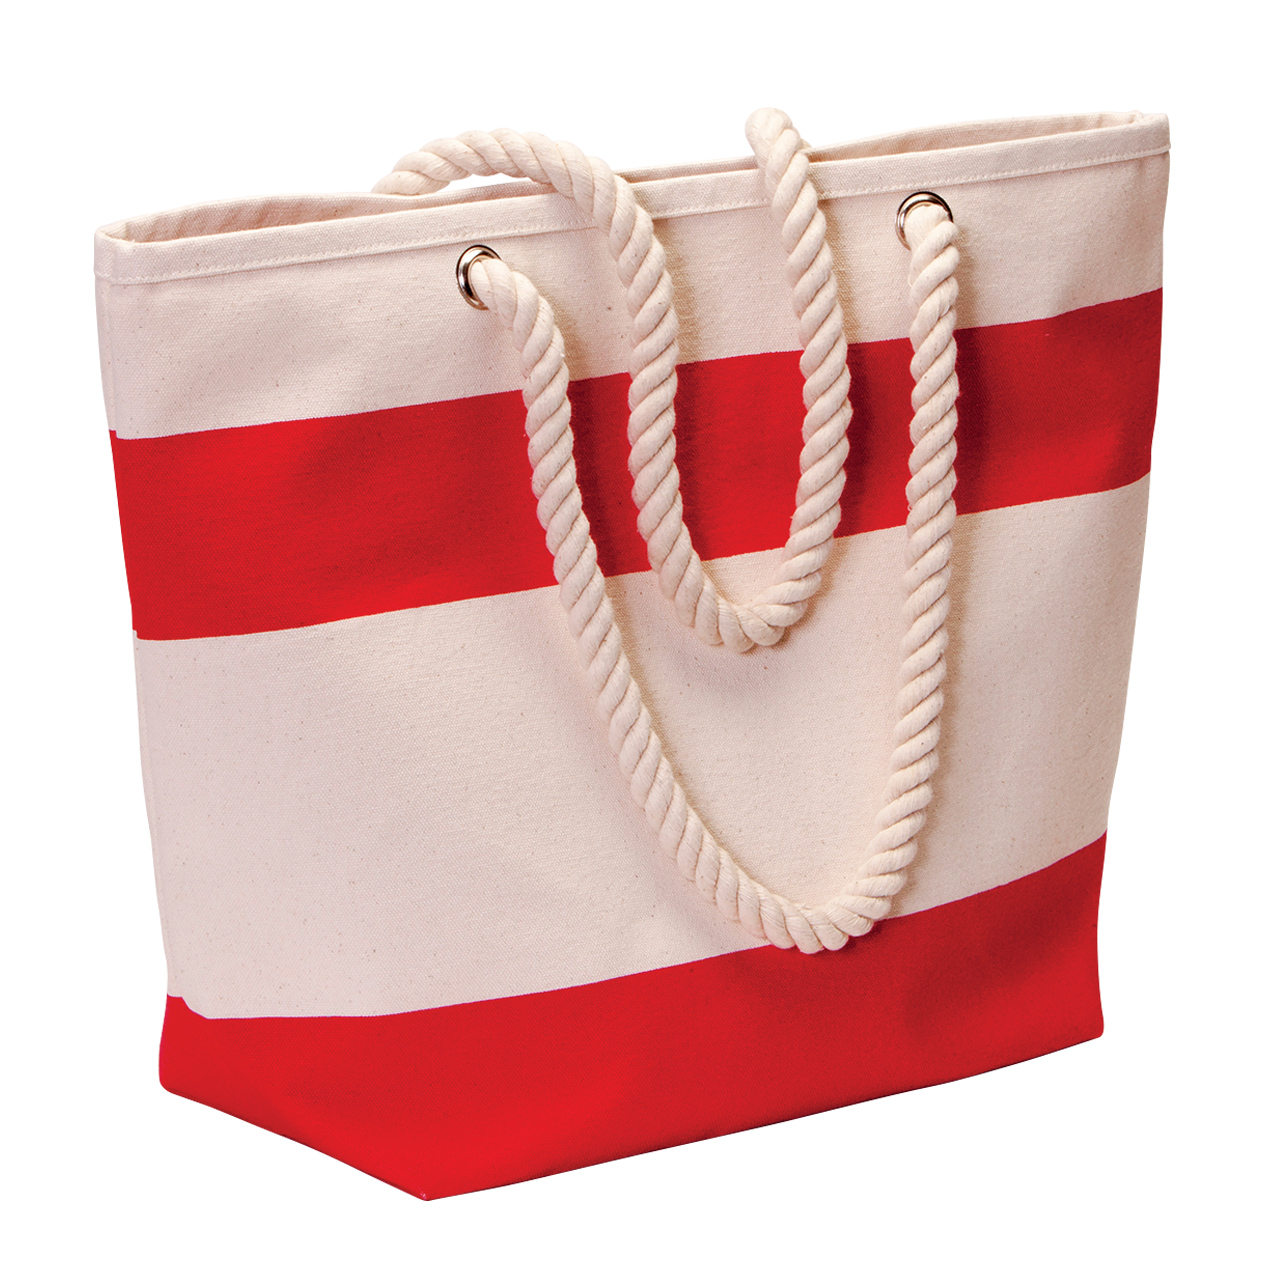 Promotional Sydney Cotton Canvas Tote Bags: Branded Online | Promotion Products